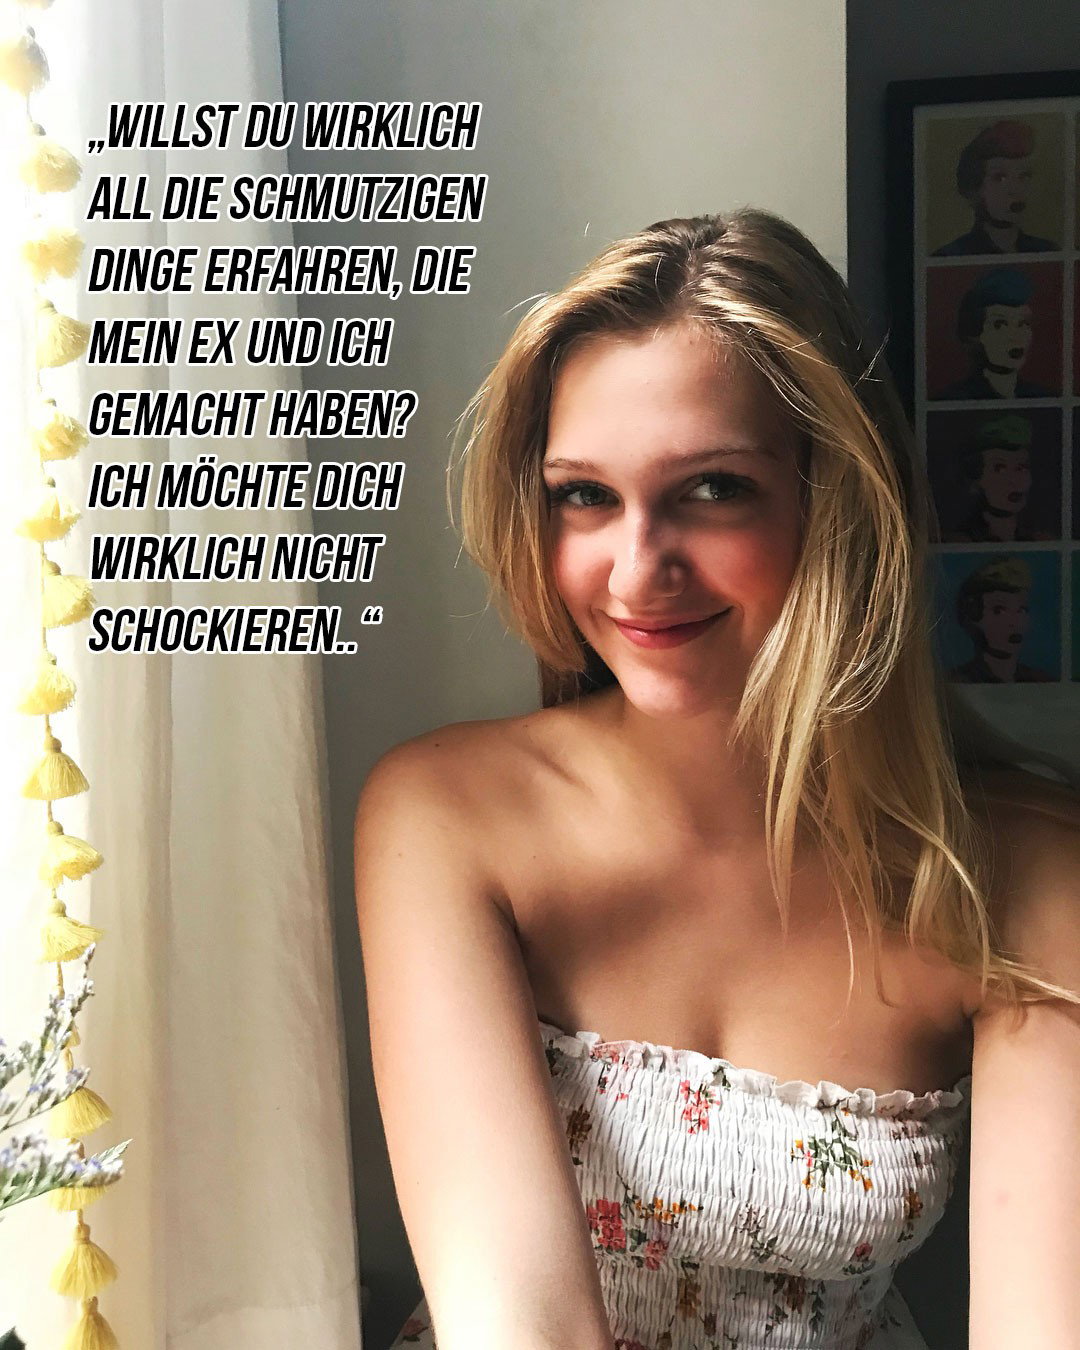 Photo by Mr. & Mrs. V with the username @sieficktfremd,  July 19, 2020 at 8:10 AM. The post is about the topic Cuckold Captions and the text says 'Wenn du sie über ihren Ex fragst...

#cuckold #caption #sieficktfremd'